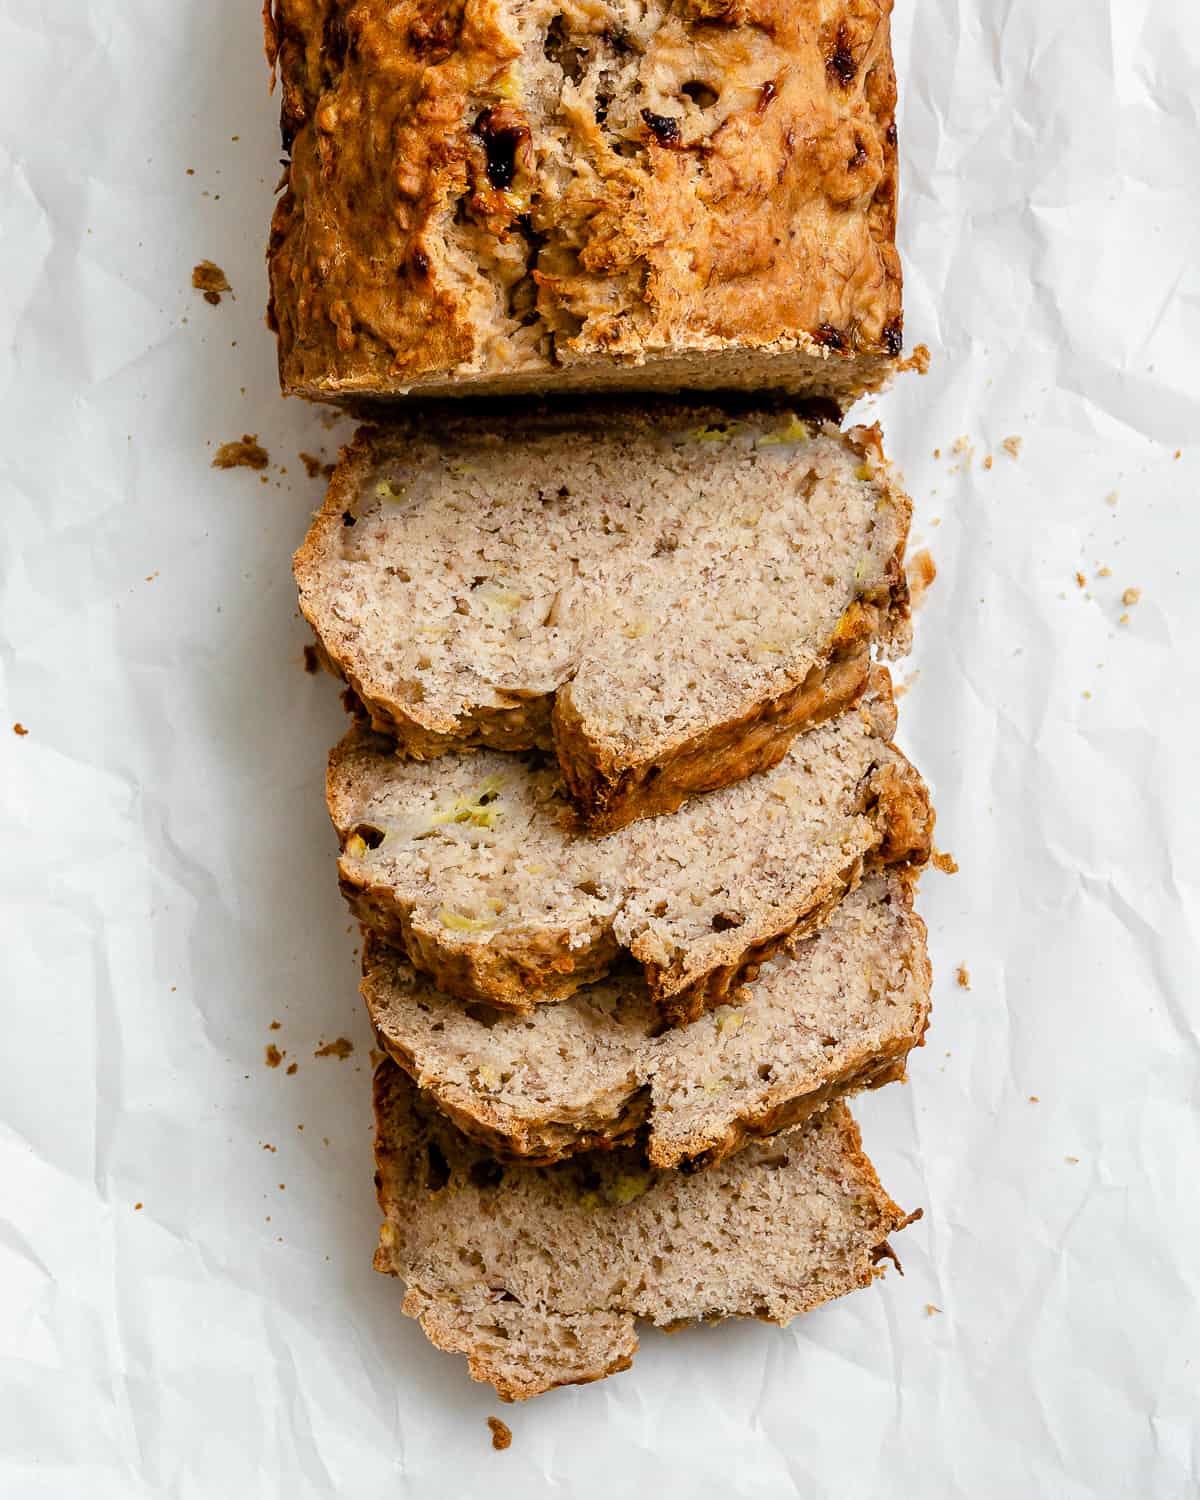 completed sliced Easy Vegan Banana Bread (With Applesauce) in a loaf pan against a white background